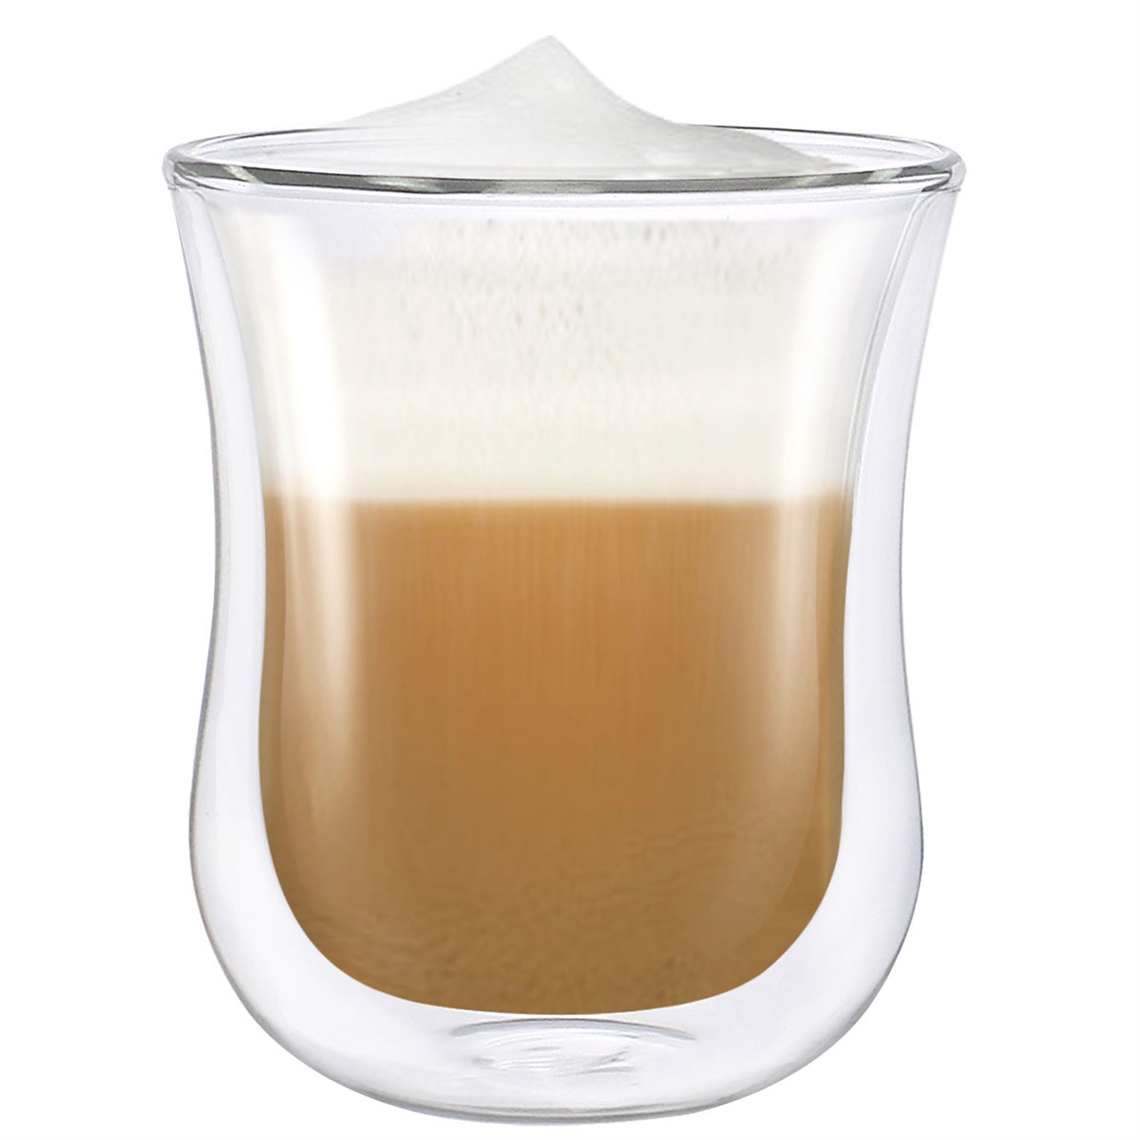 View more brandy / cognac glasses from our Tea & Coffee Cups range